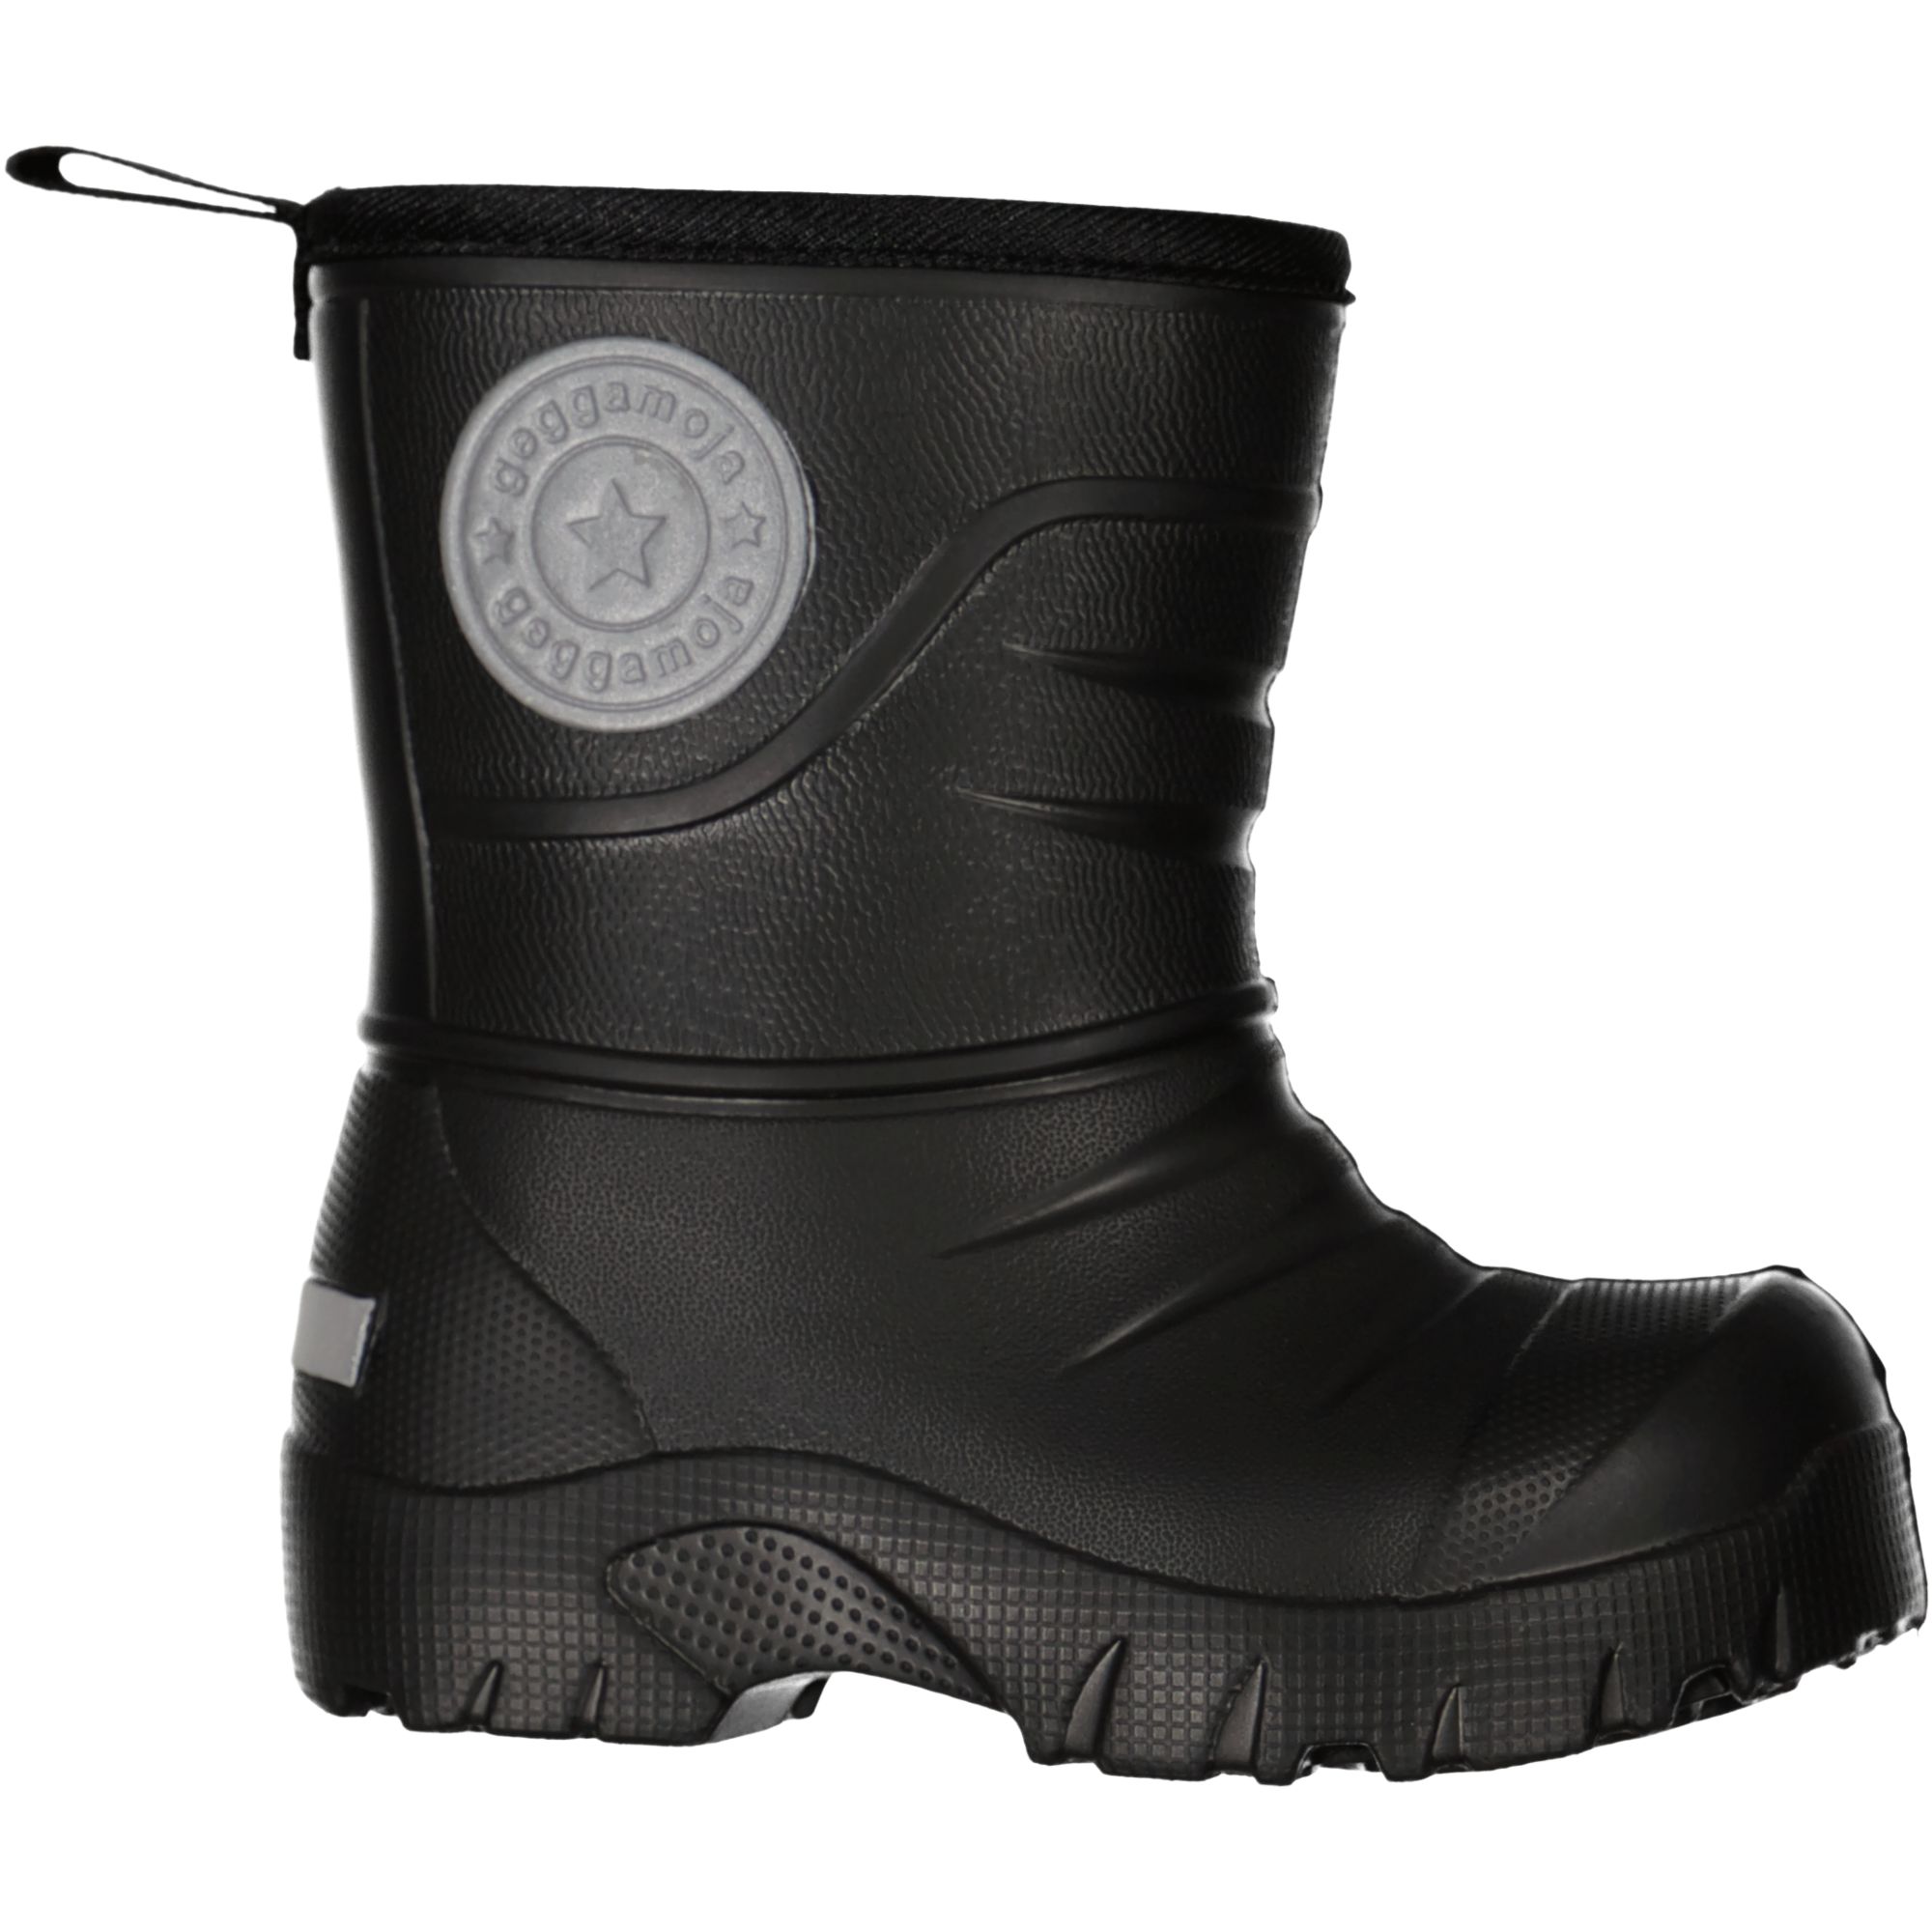 All-weather Boot Black